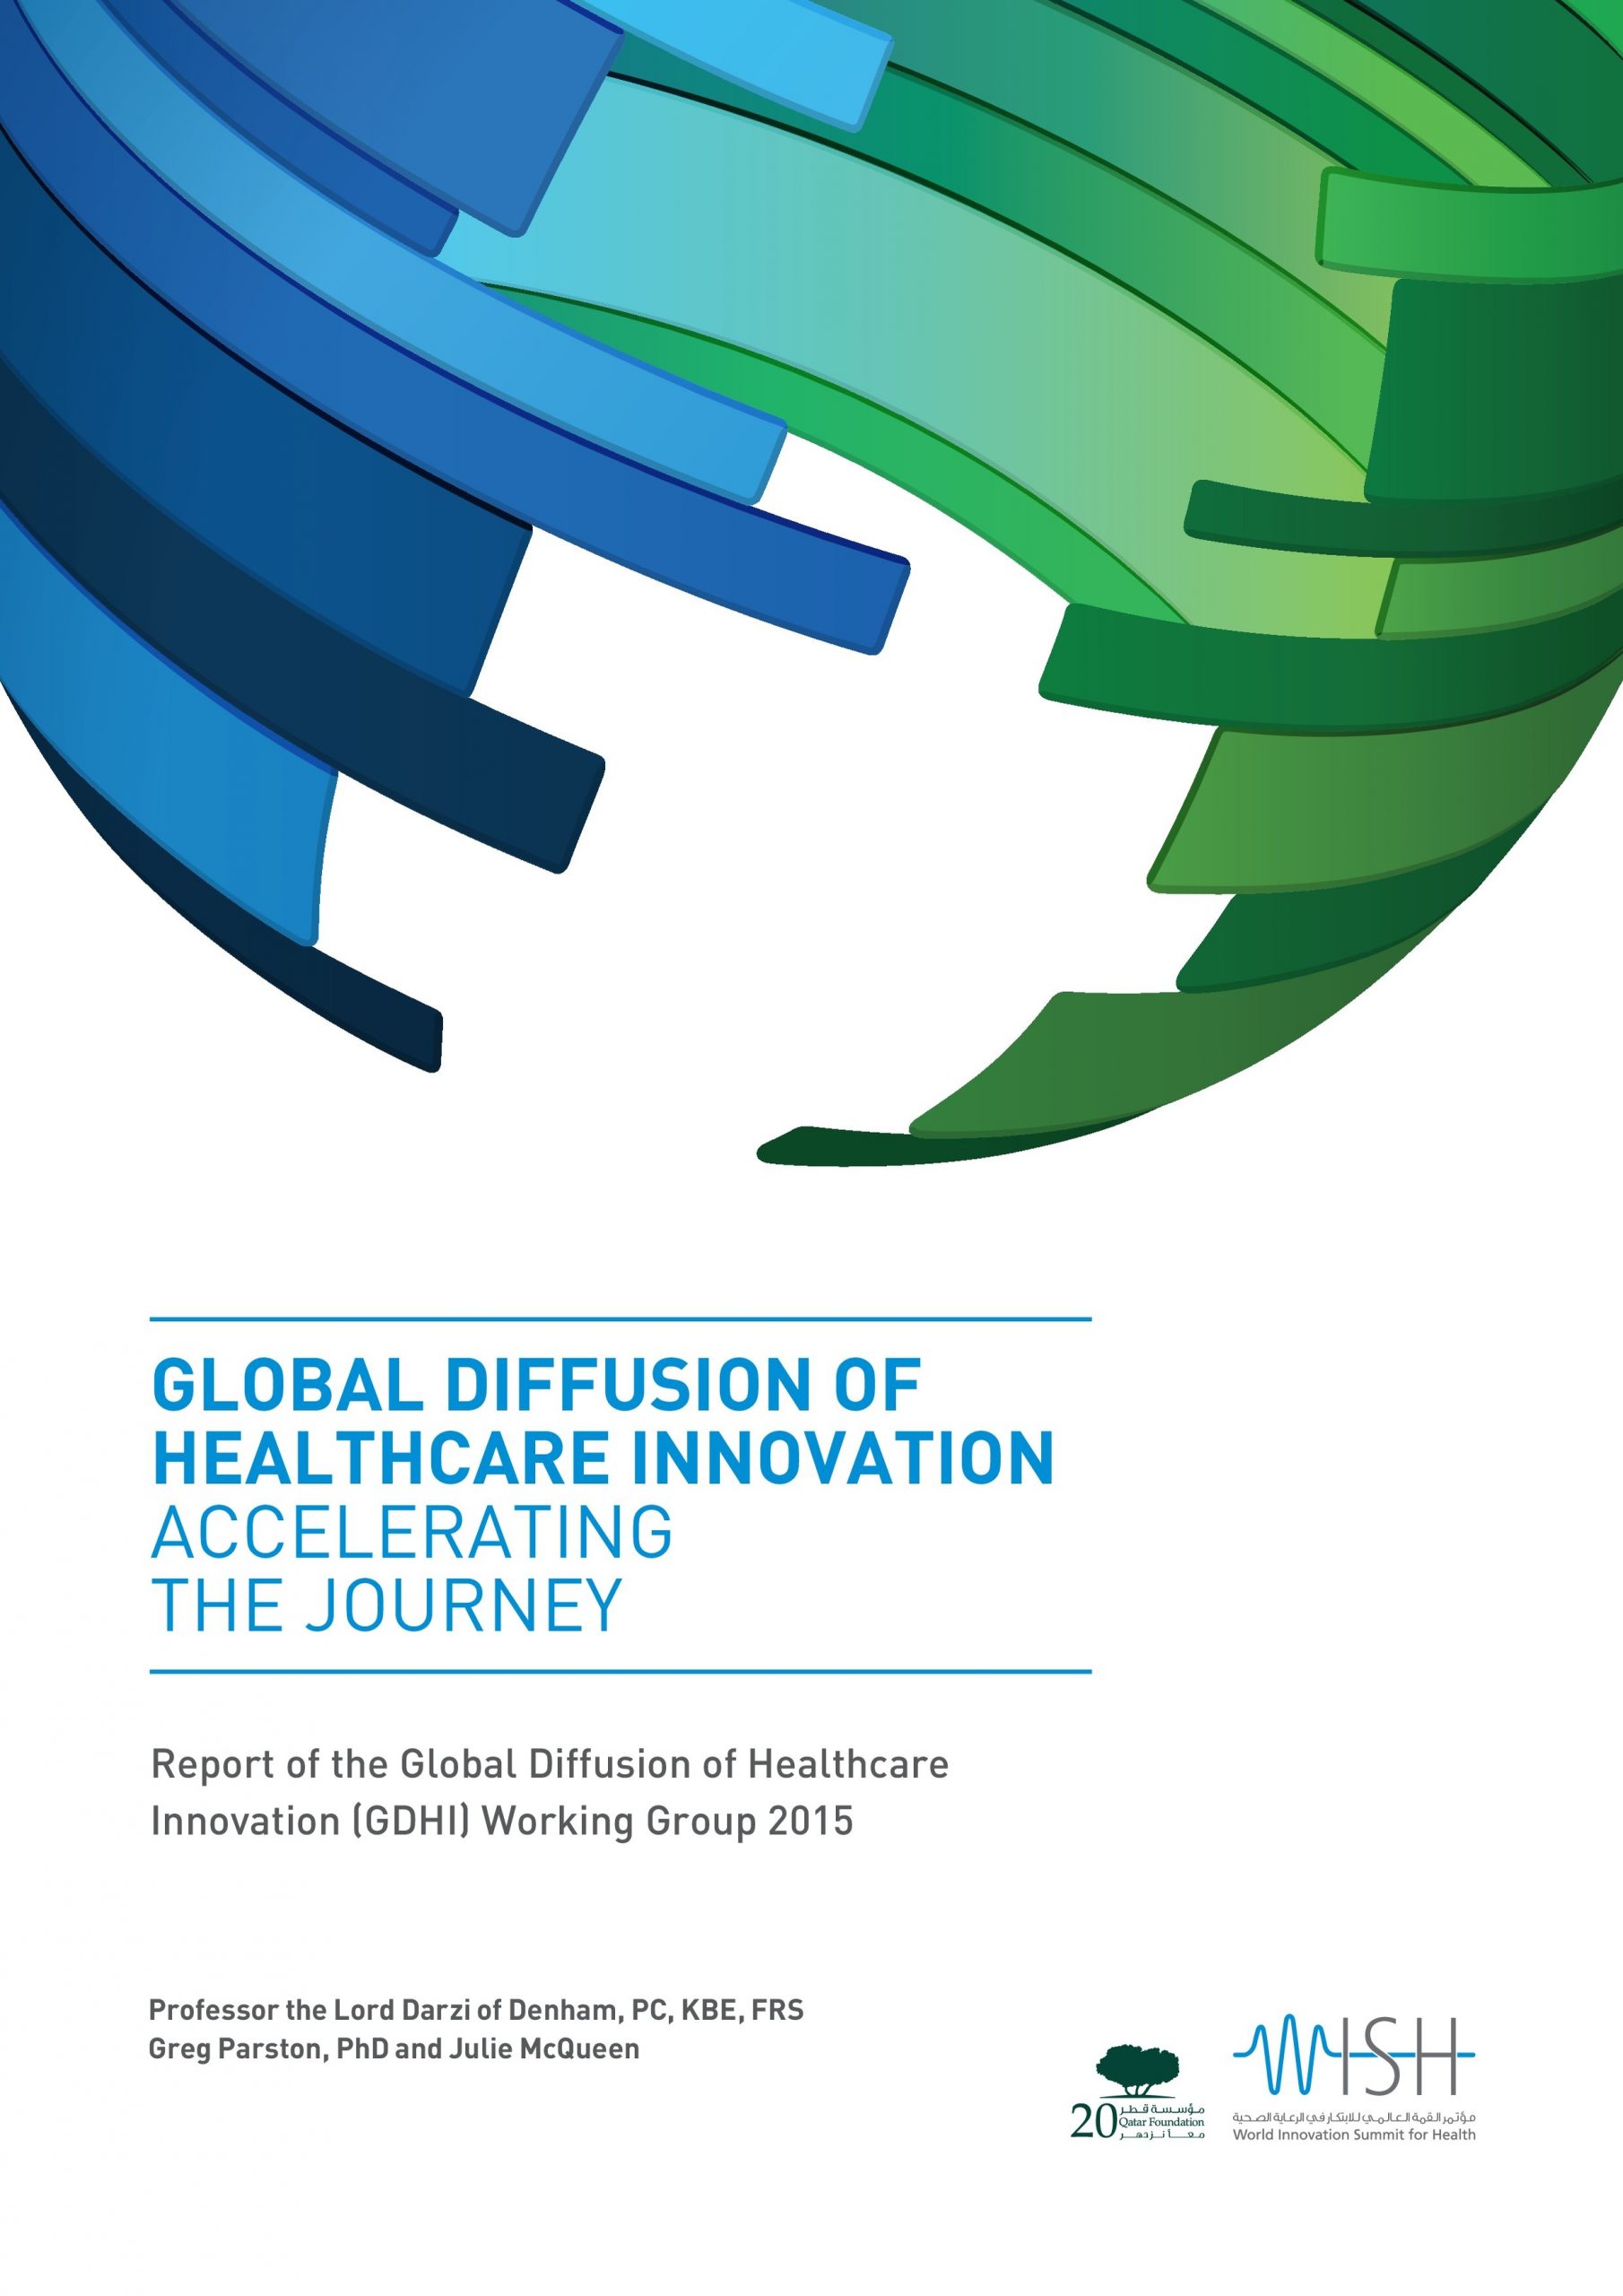 Global Diffusion Healthcare Innovation: Accelerating the Journey 